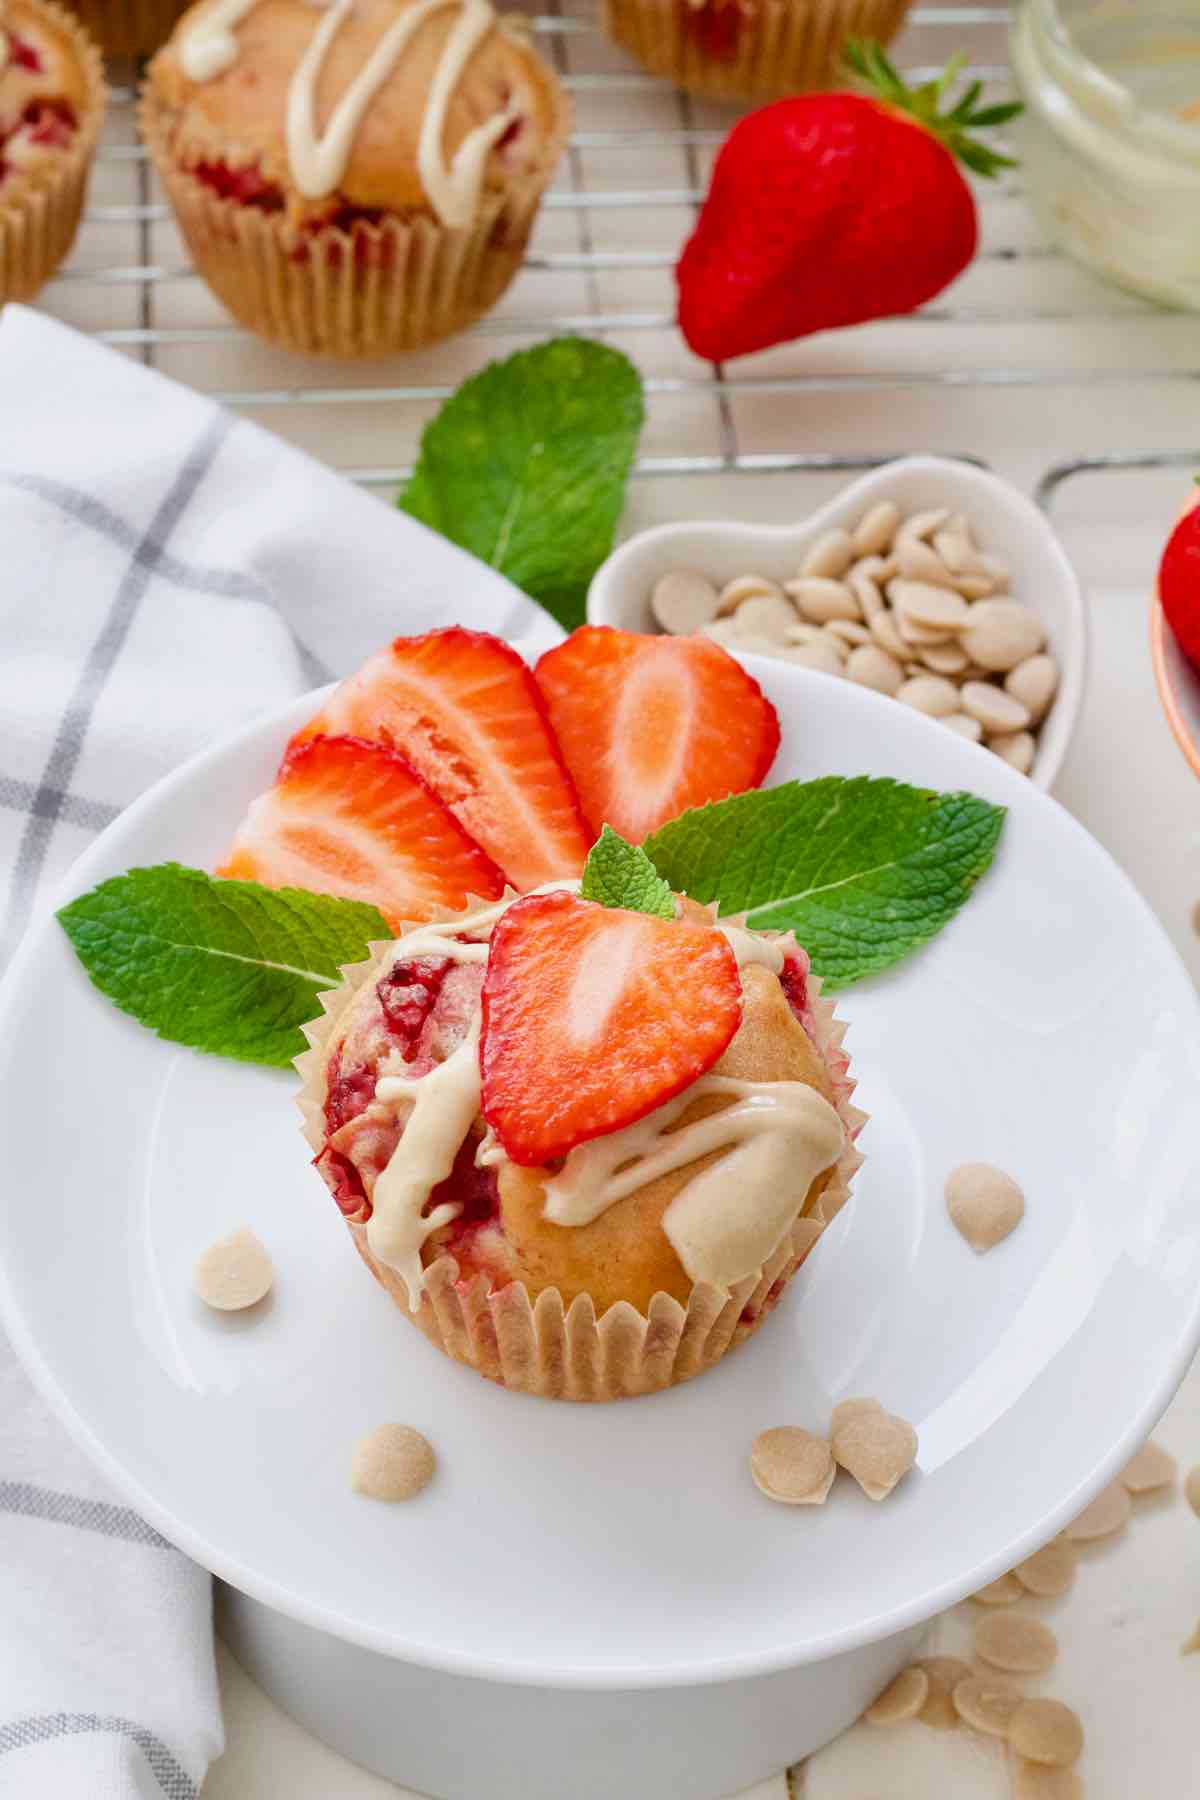 Strawberry muffin on a plate decorated with a slice of strawberry and mint leaves.